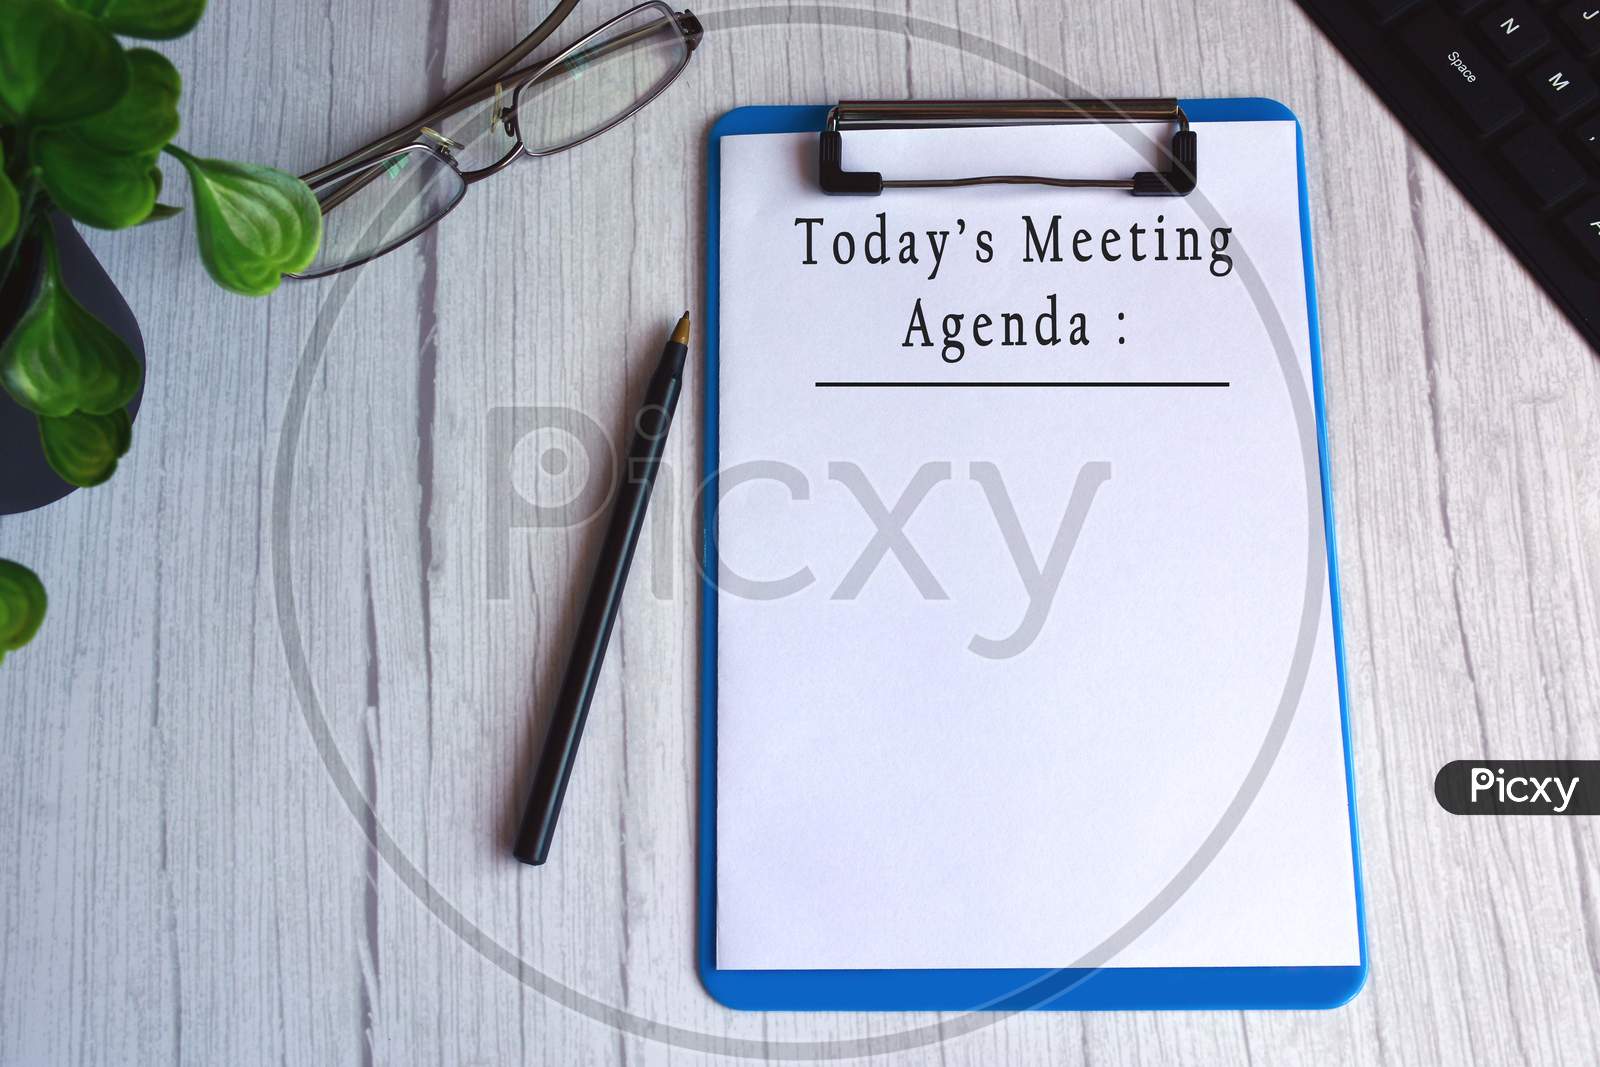 Today's meeting agenda text on blue clip board. Meeting goals concept